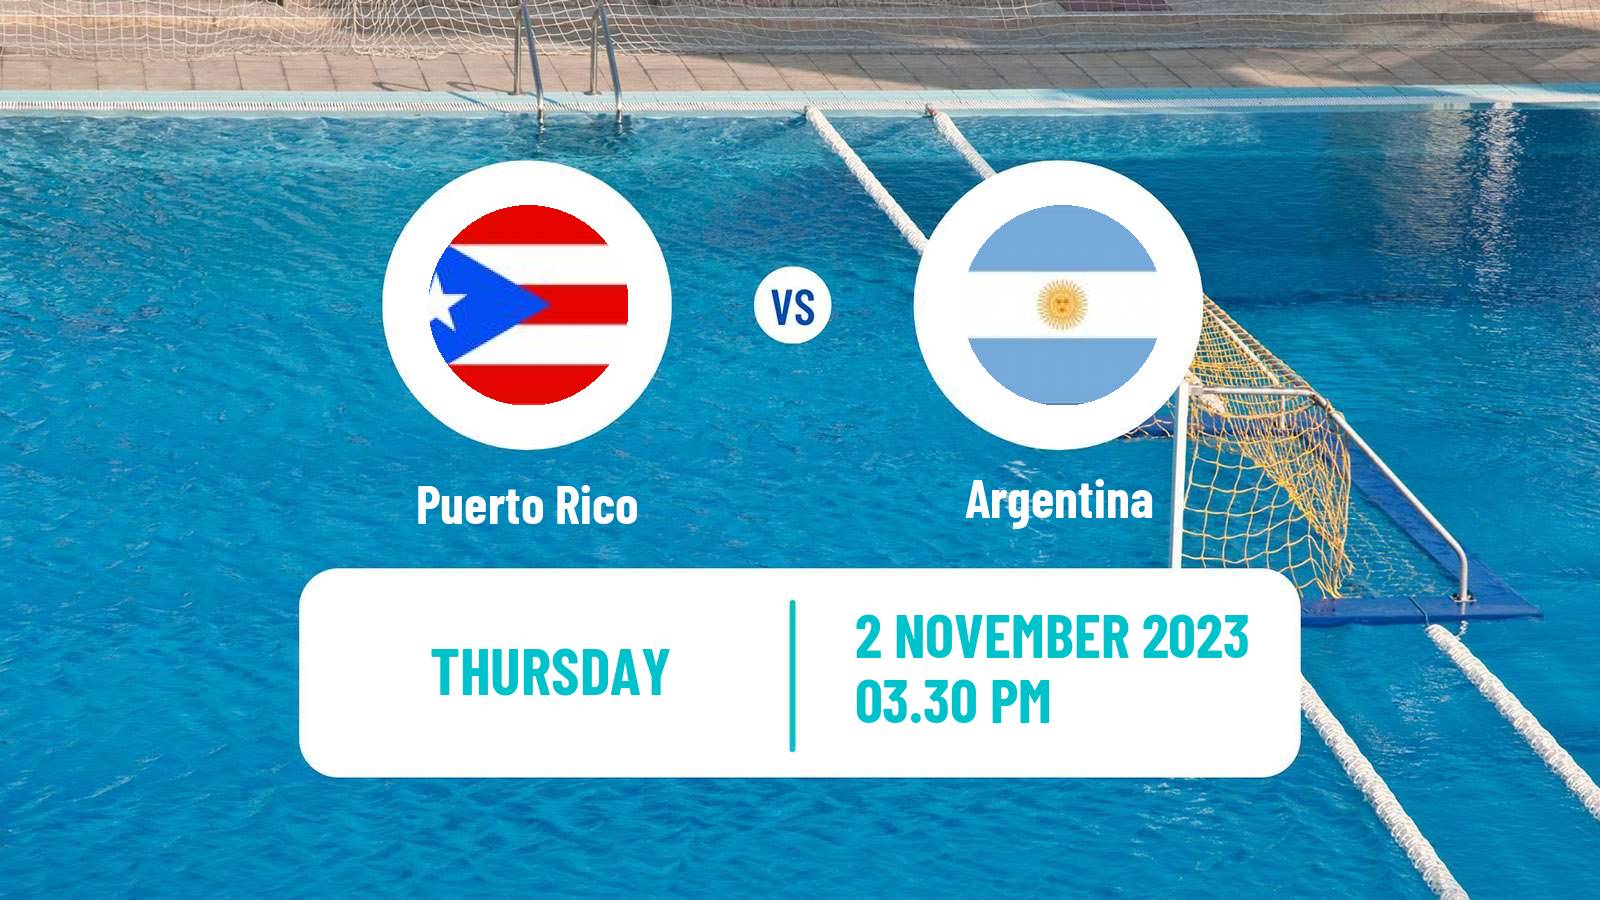 Water polo Pan American Games Water Polo Puerto Rico - Argentina